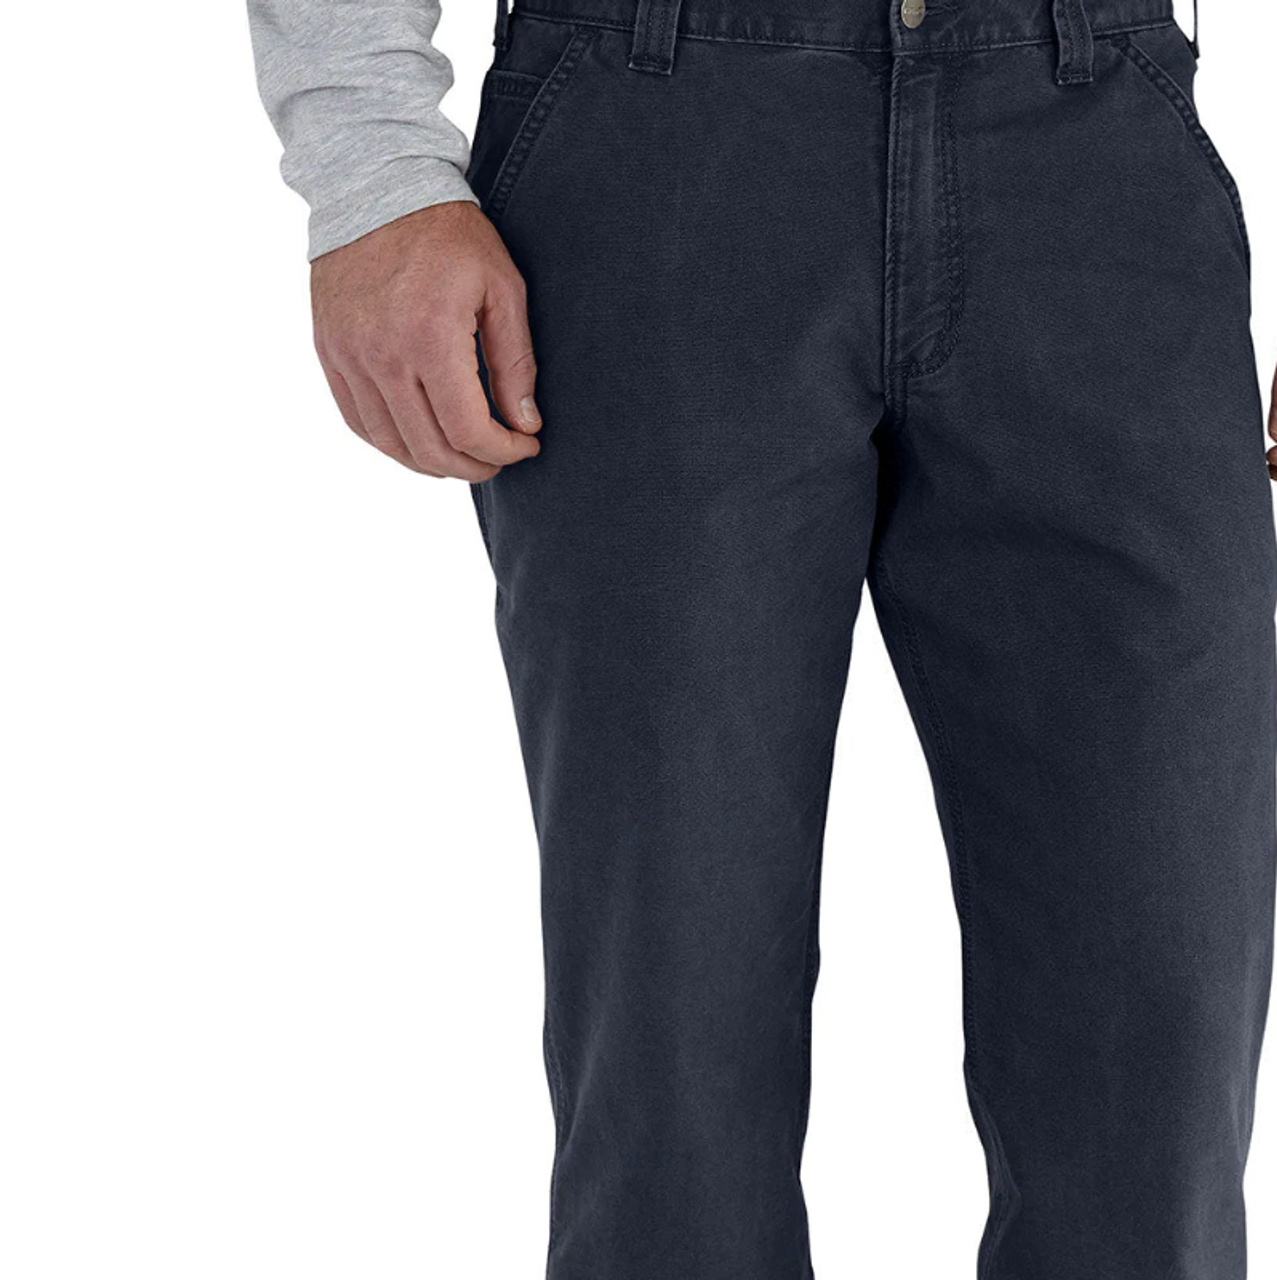 Carhartt Men's Rugged Flex Relaxed Fit Canvas 5 Pocket Work Pant